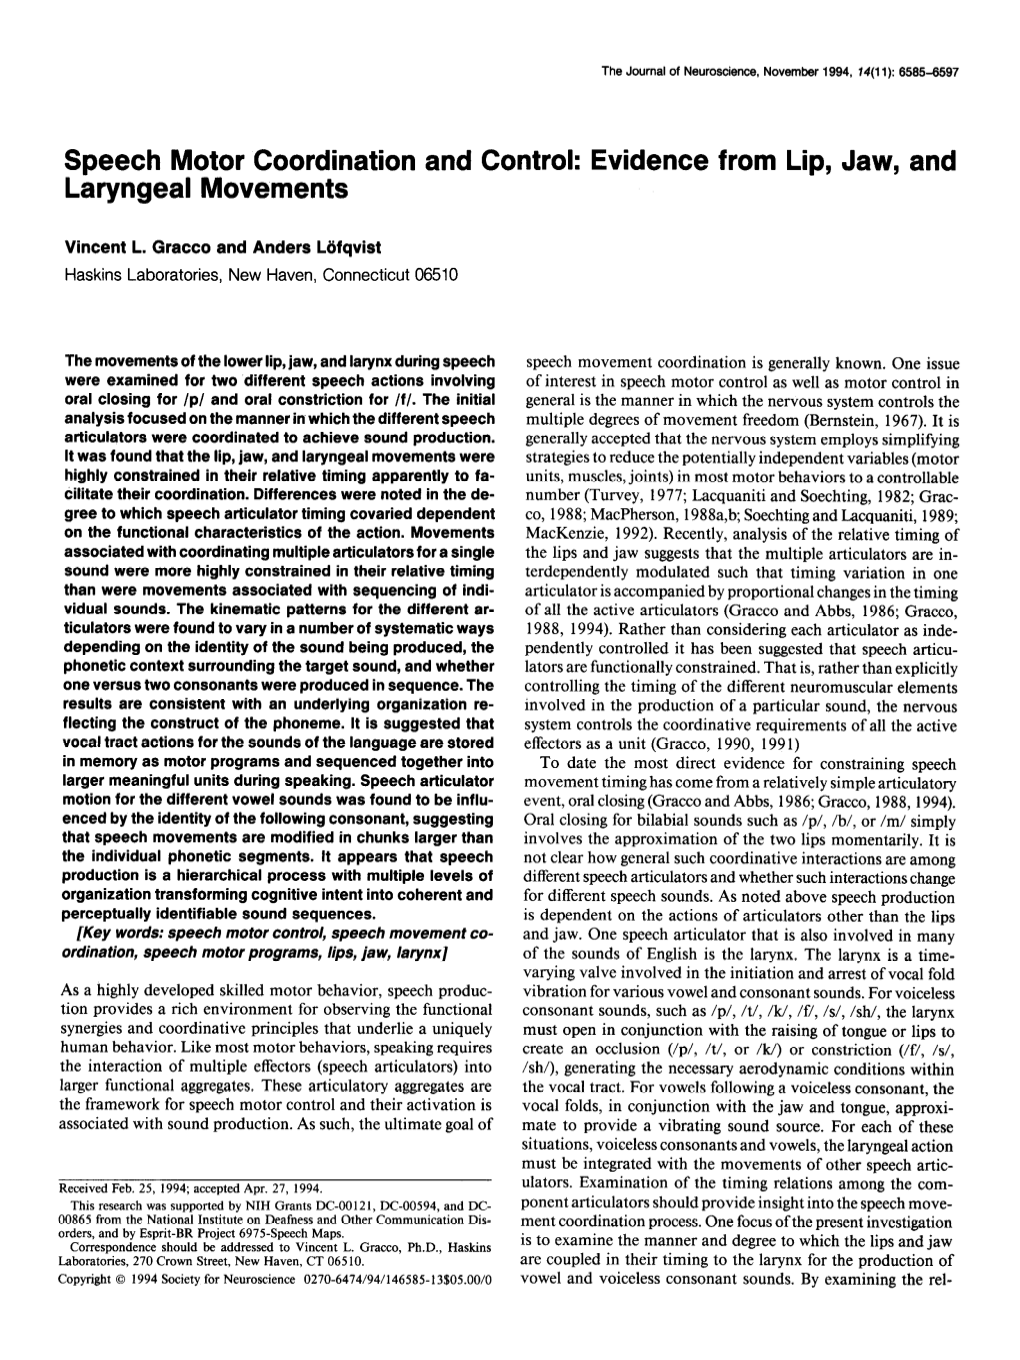 Speech Motor Coordination and Control: Evidence from Lip, Jaw, and Lkyngeal Movements